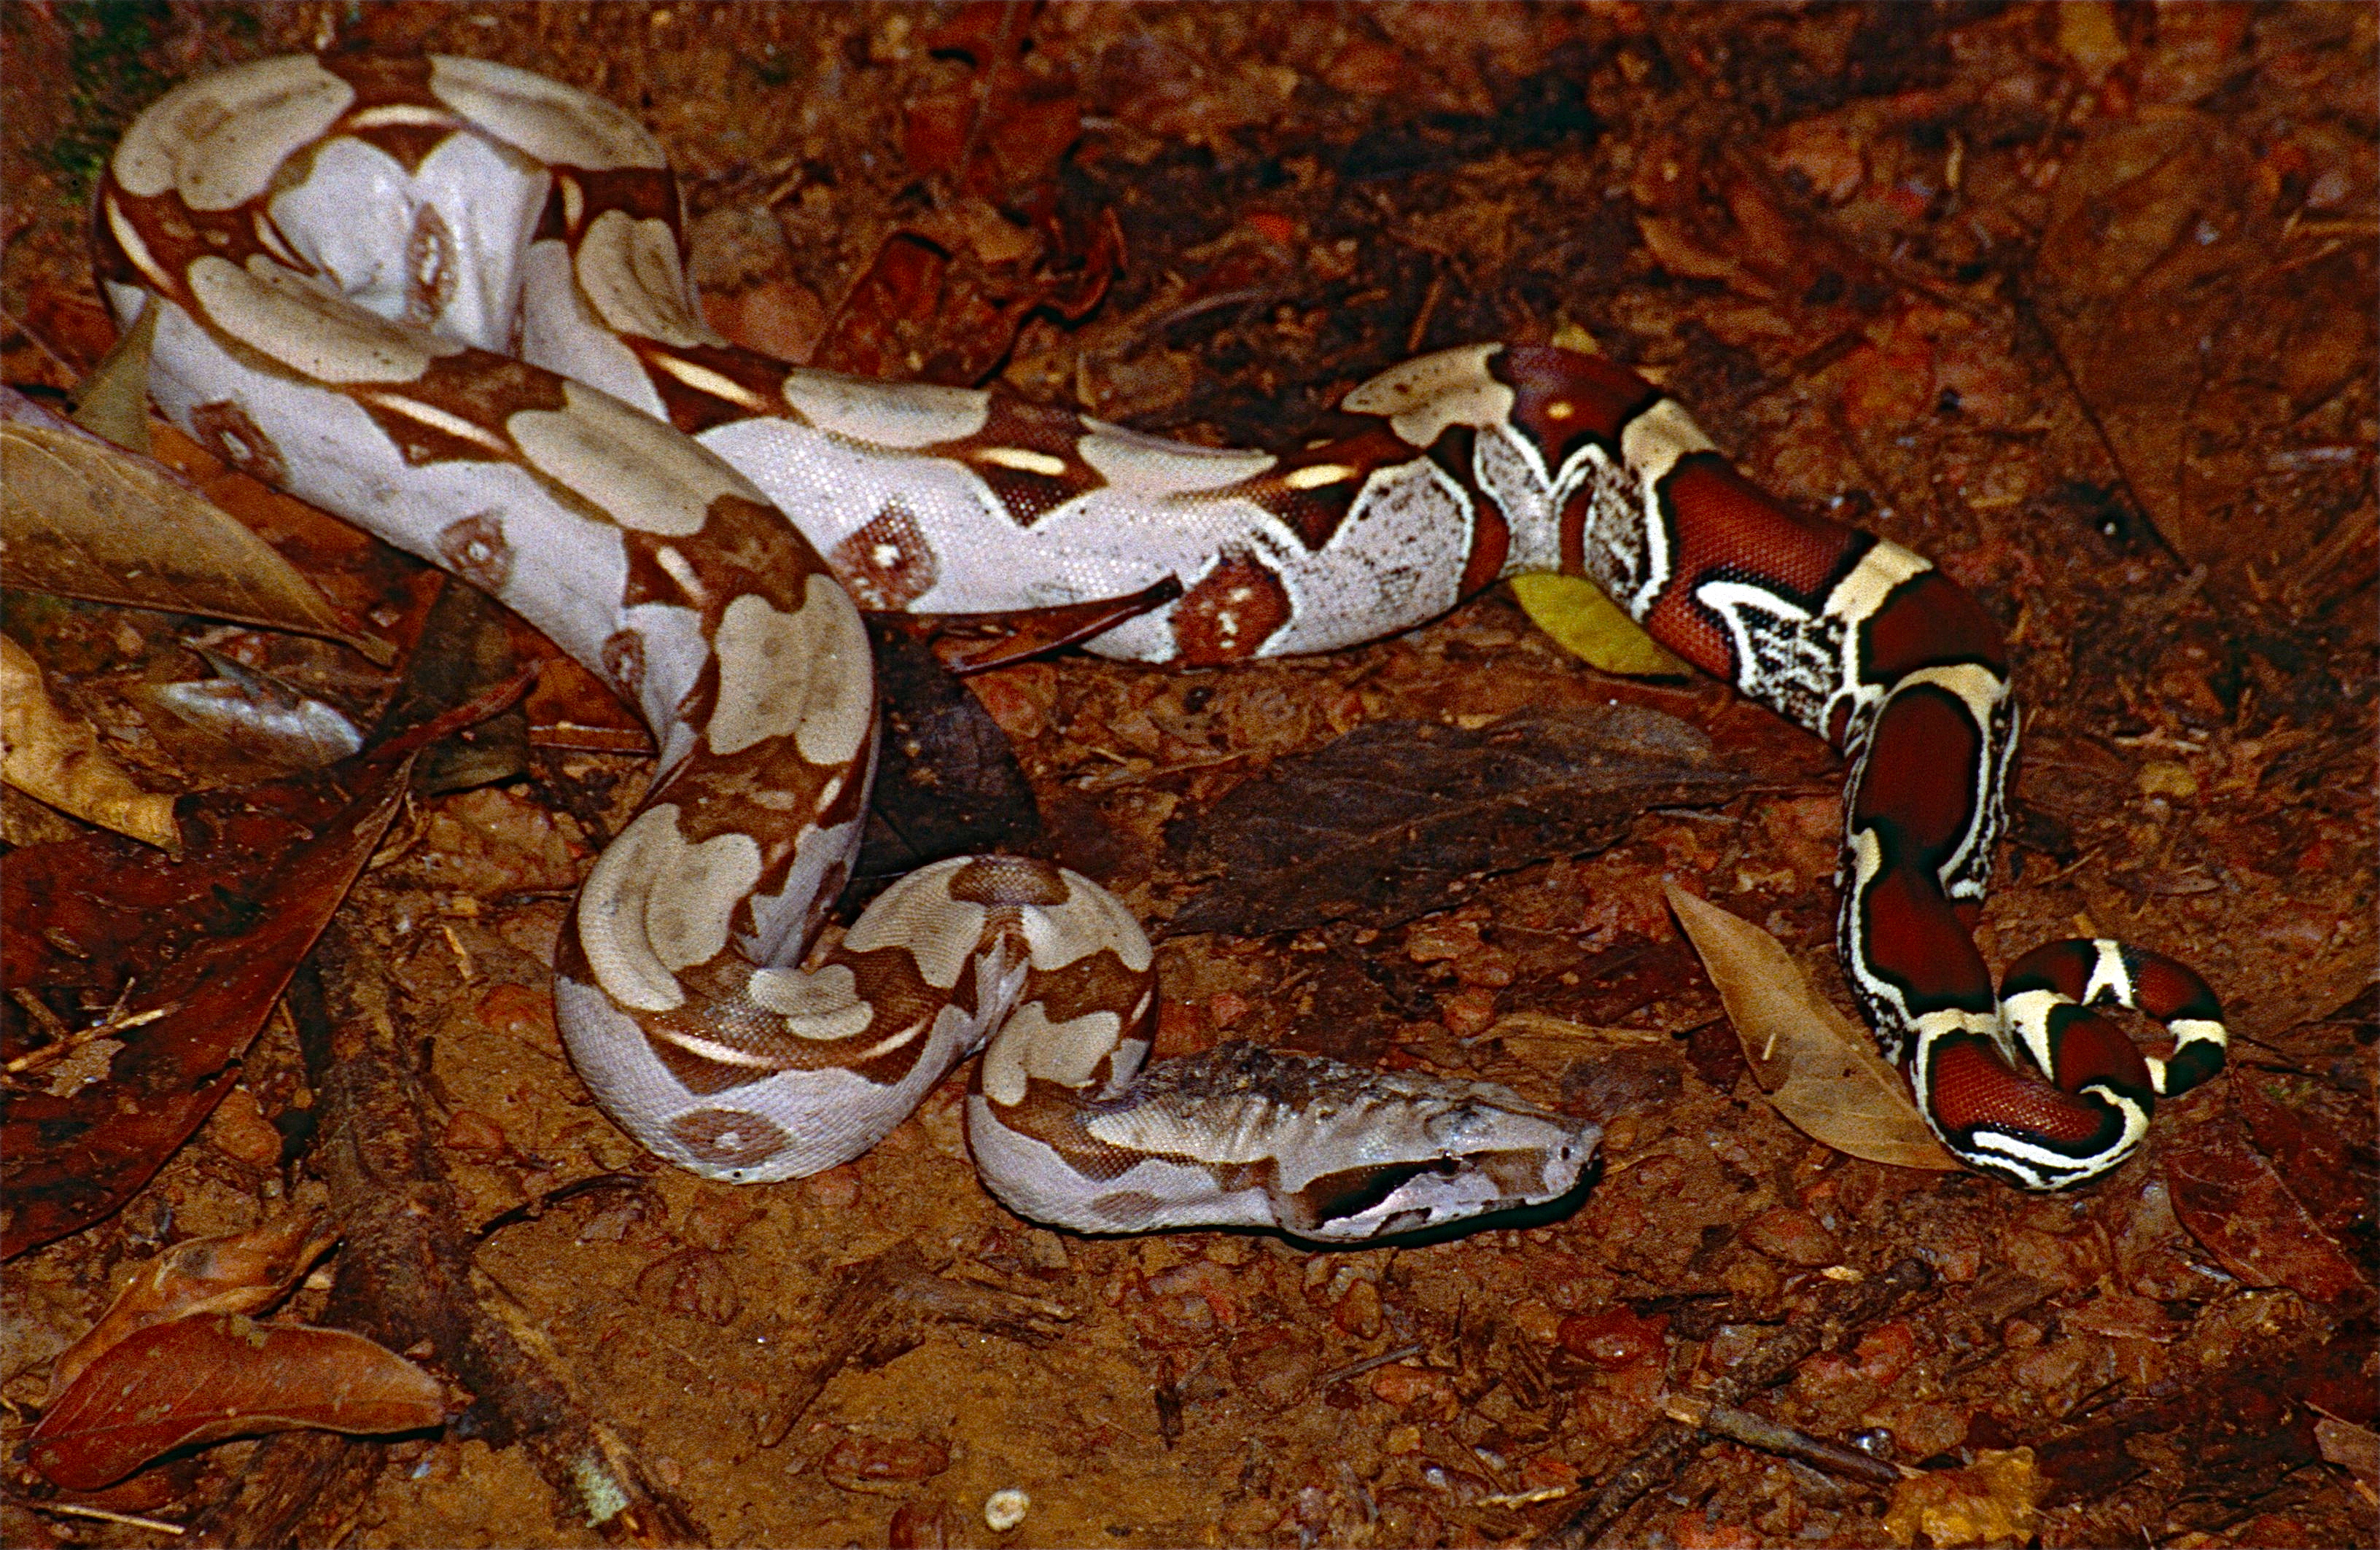 Red Tail (Boa constrictor constrictor) (10642424253).jpg - Wikimedia Commons